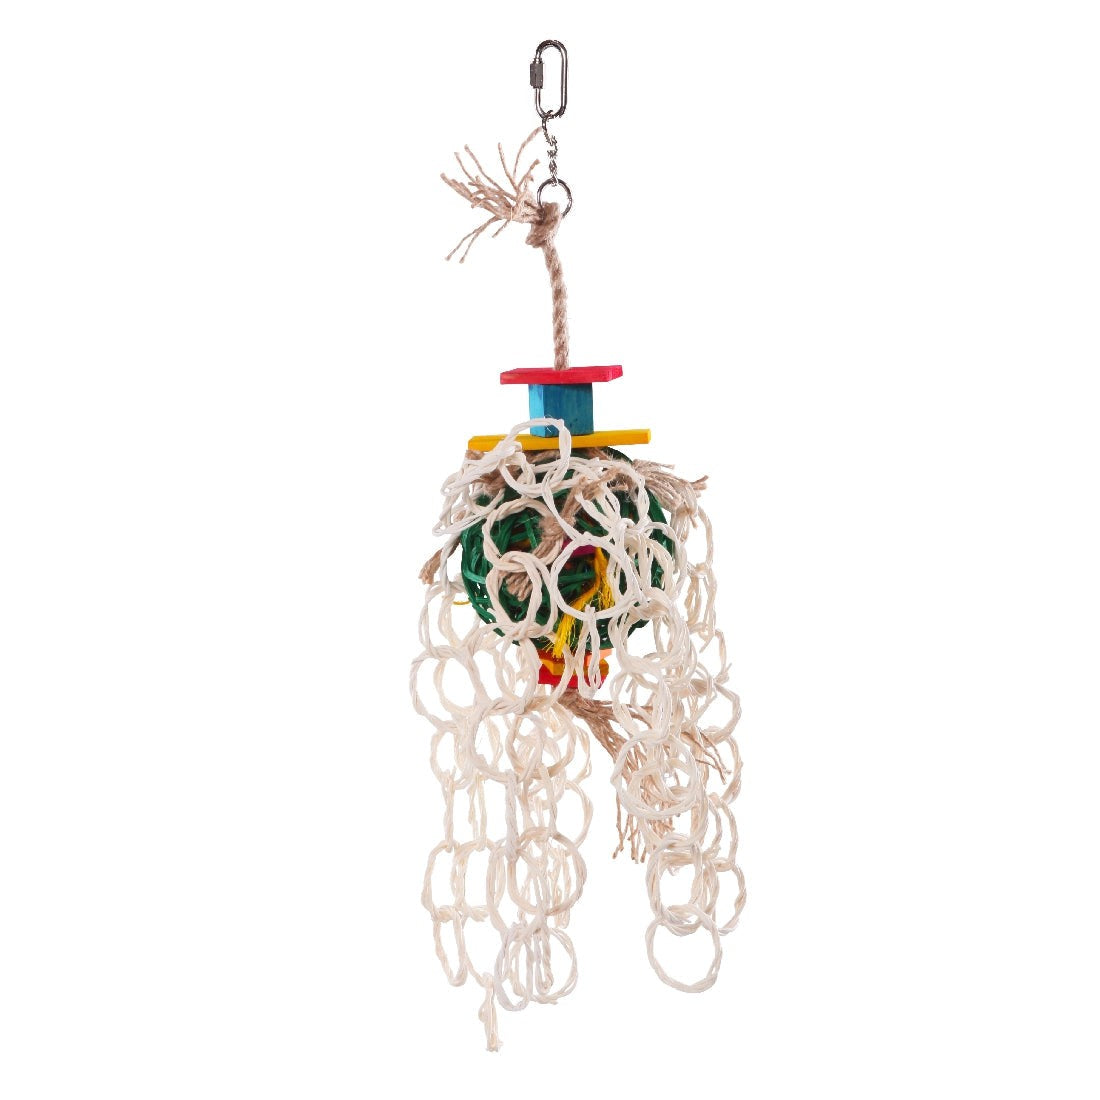 Colorful hanging bird toy with ropes and wooden beads isolated on white.